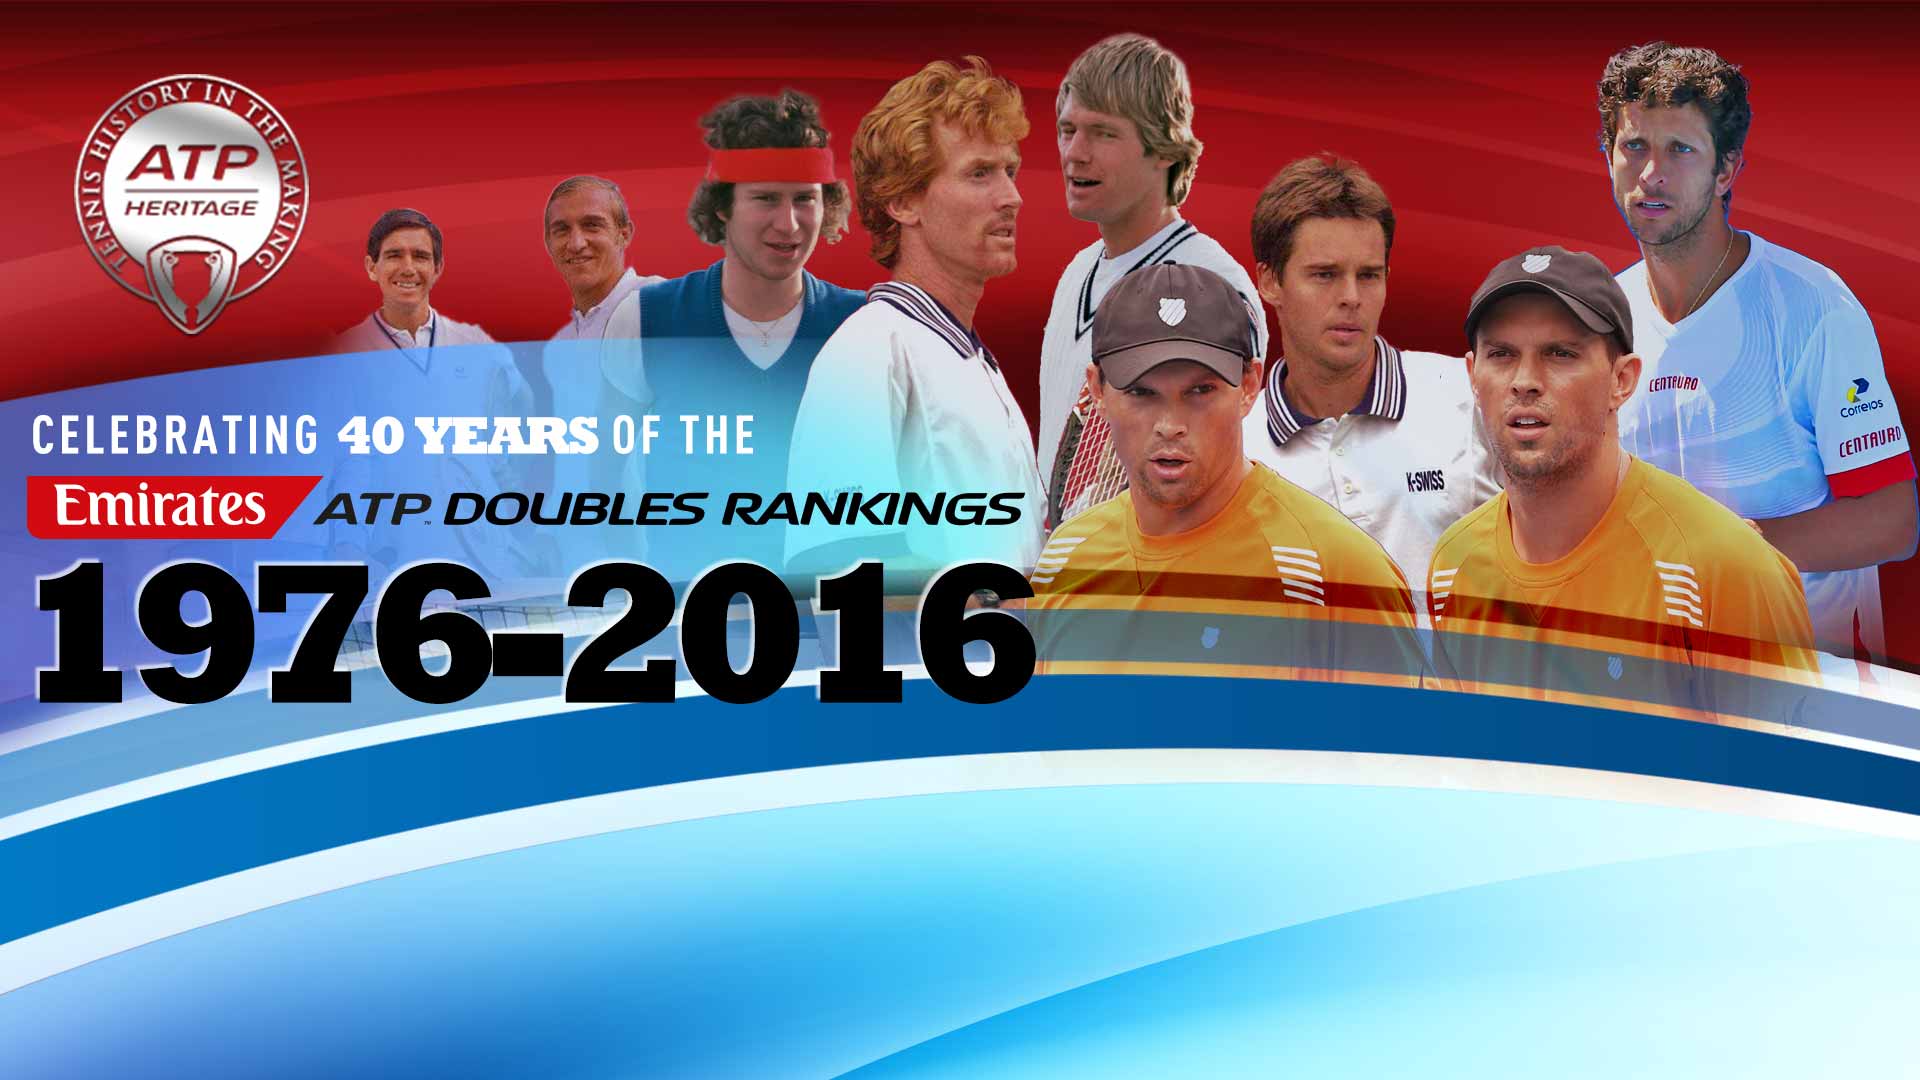 The Rankings That Changed Doubles ATP Tour Tennis